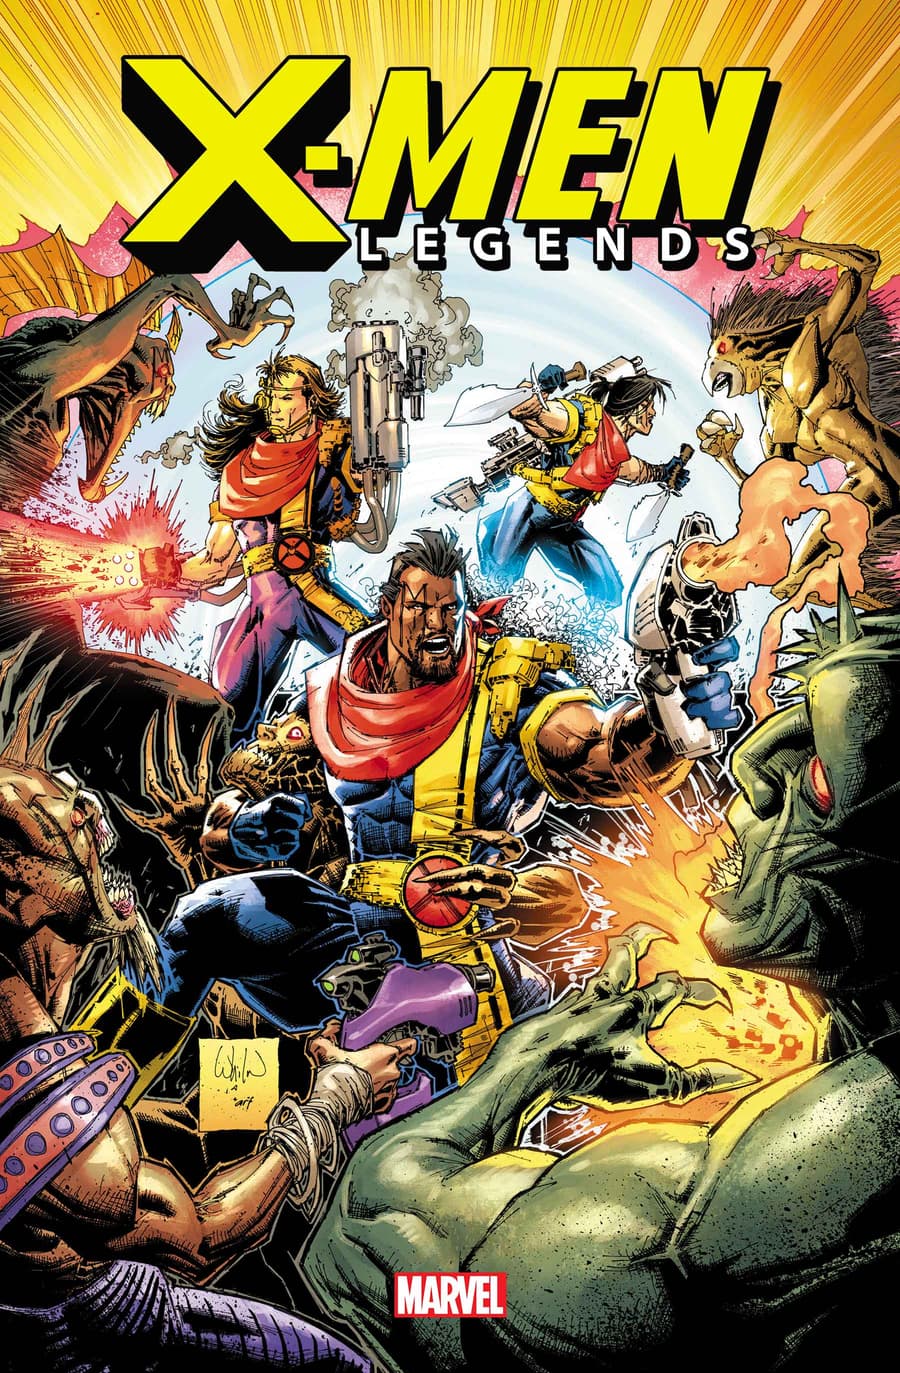 X-MEN LEGENDS #5 Art and Cover by WHILCE PORTACIO